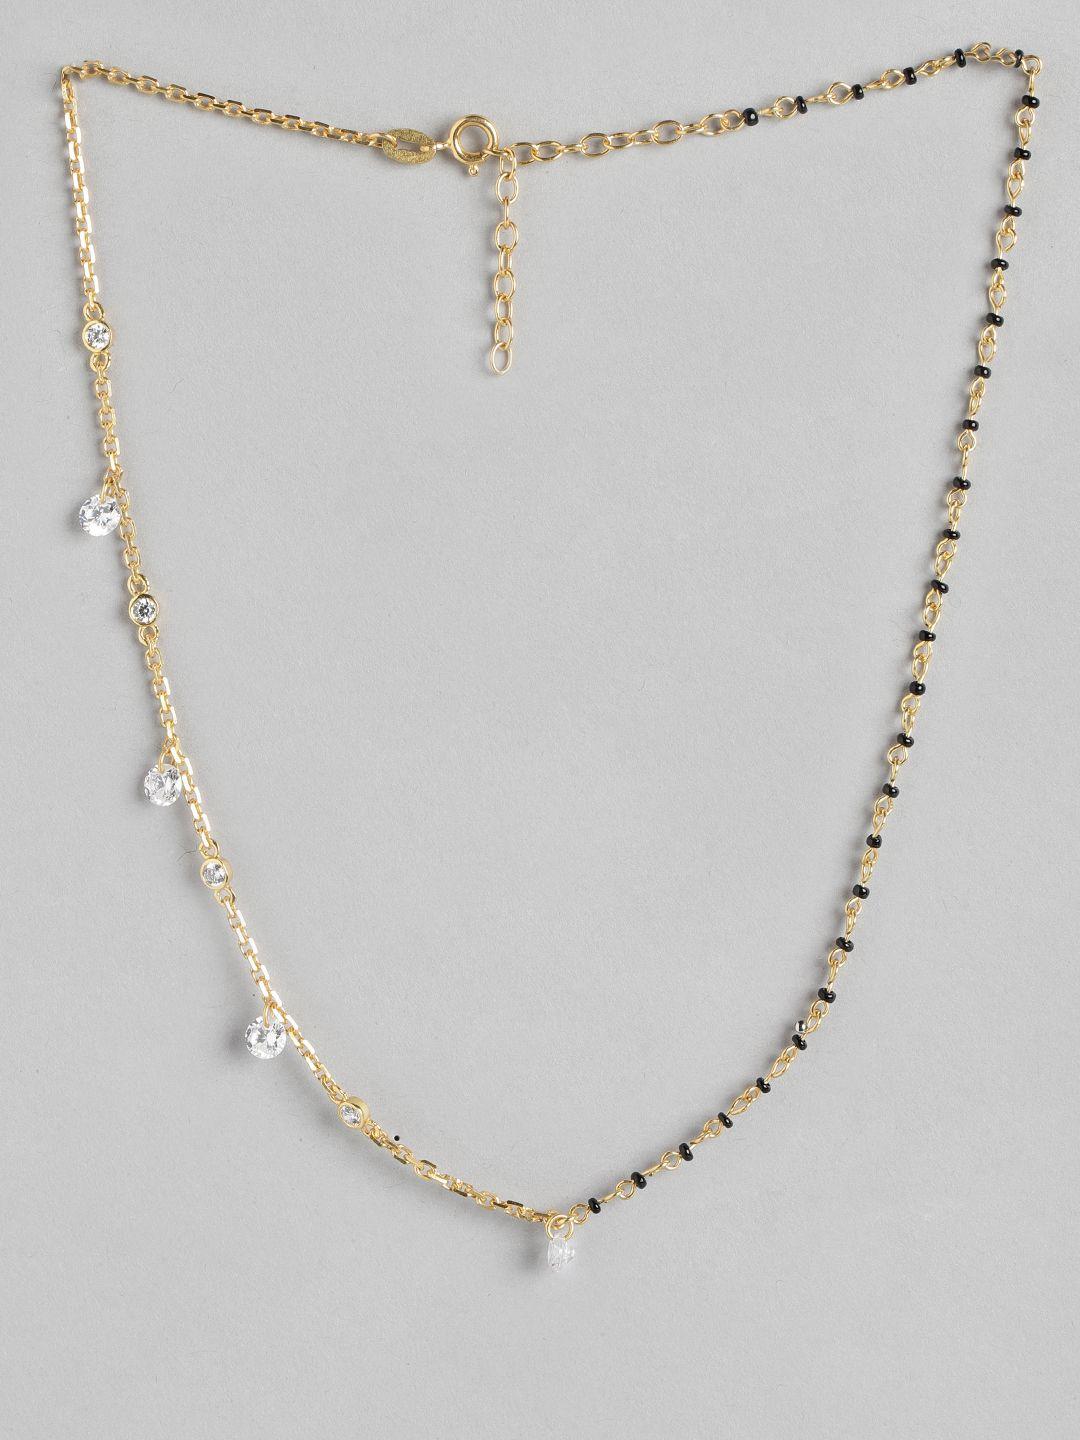 carlton london gold-plated crystals-studded mangalsutra